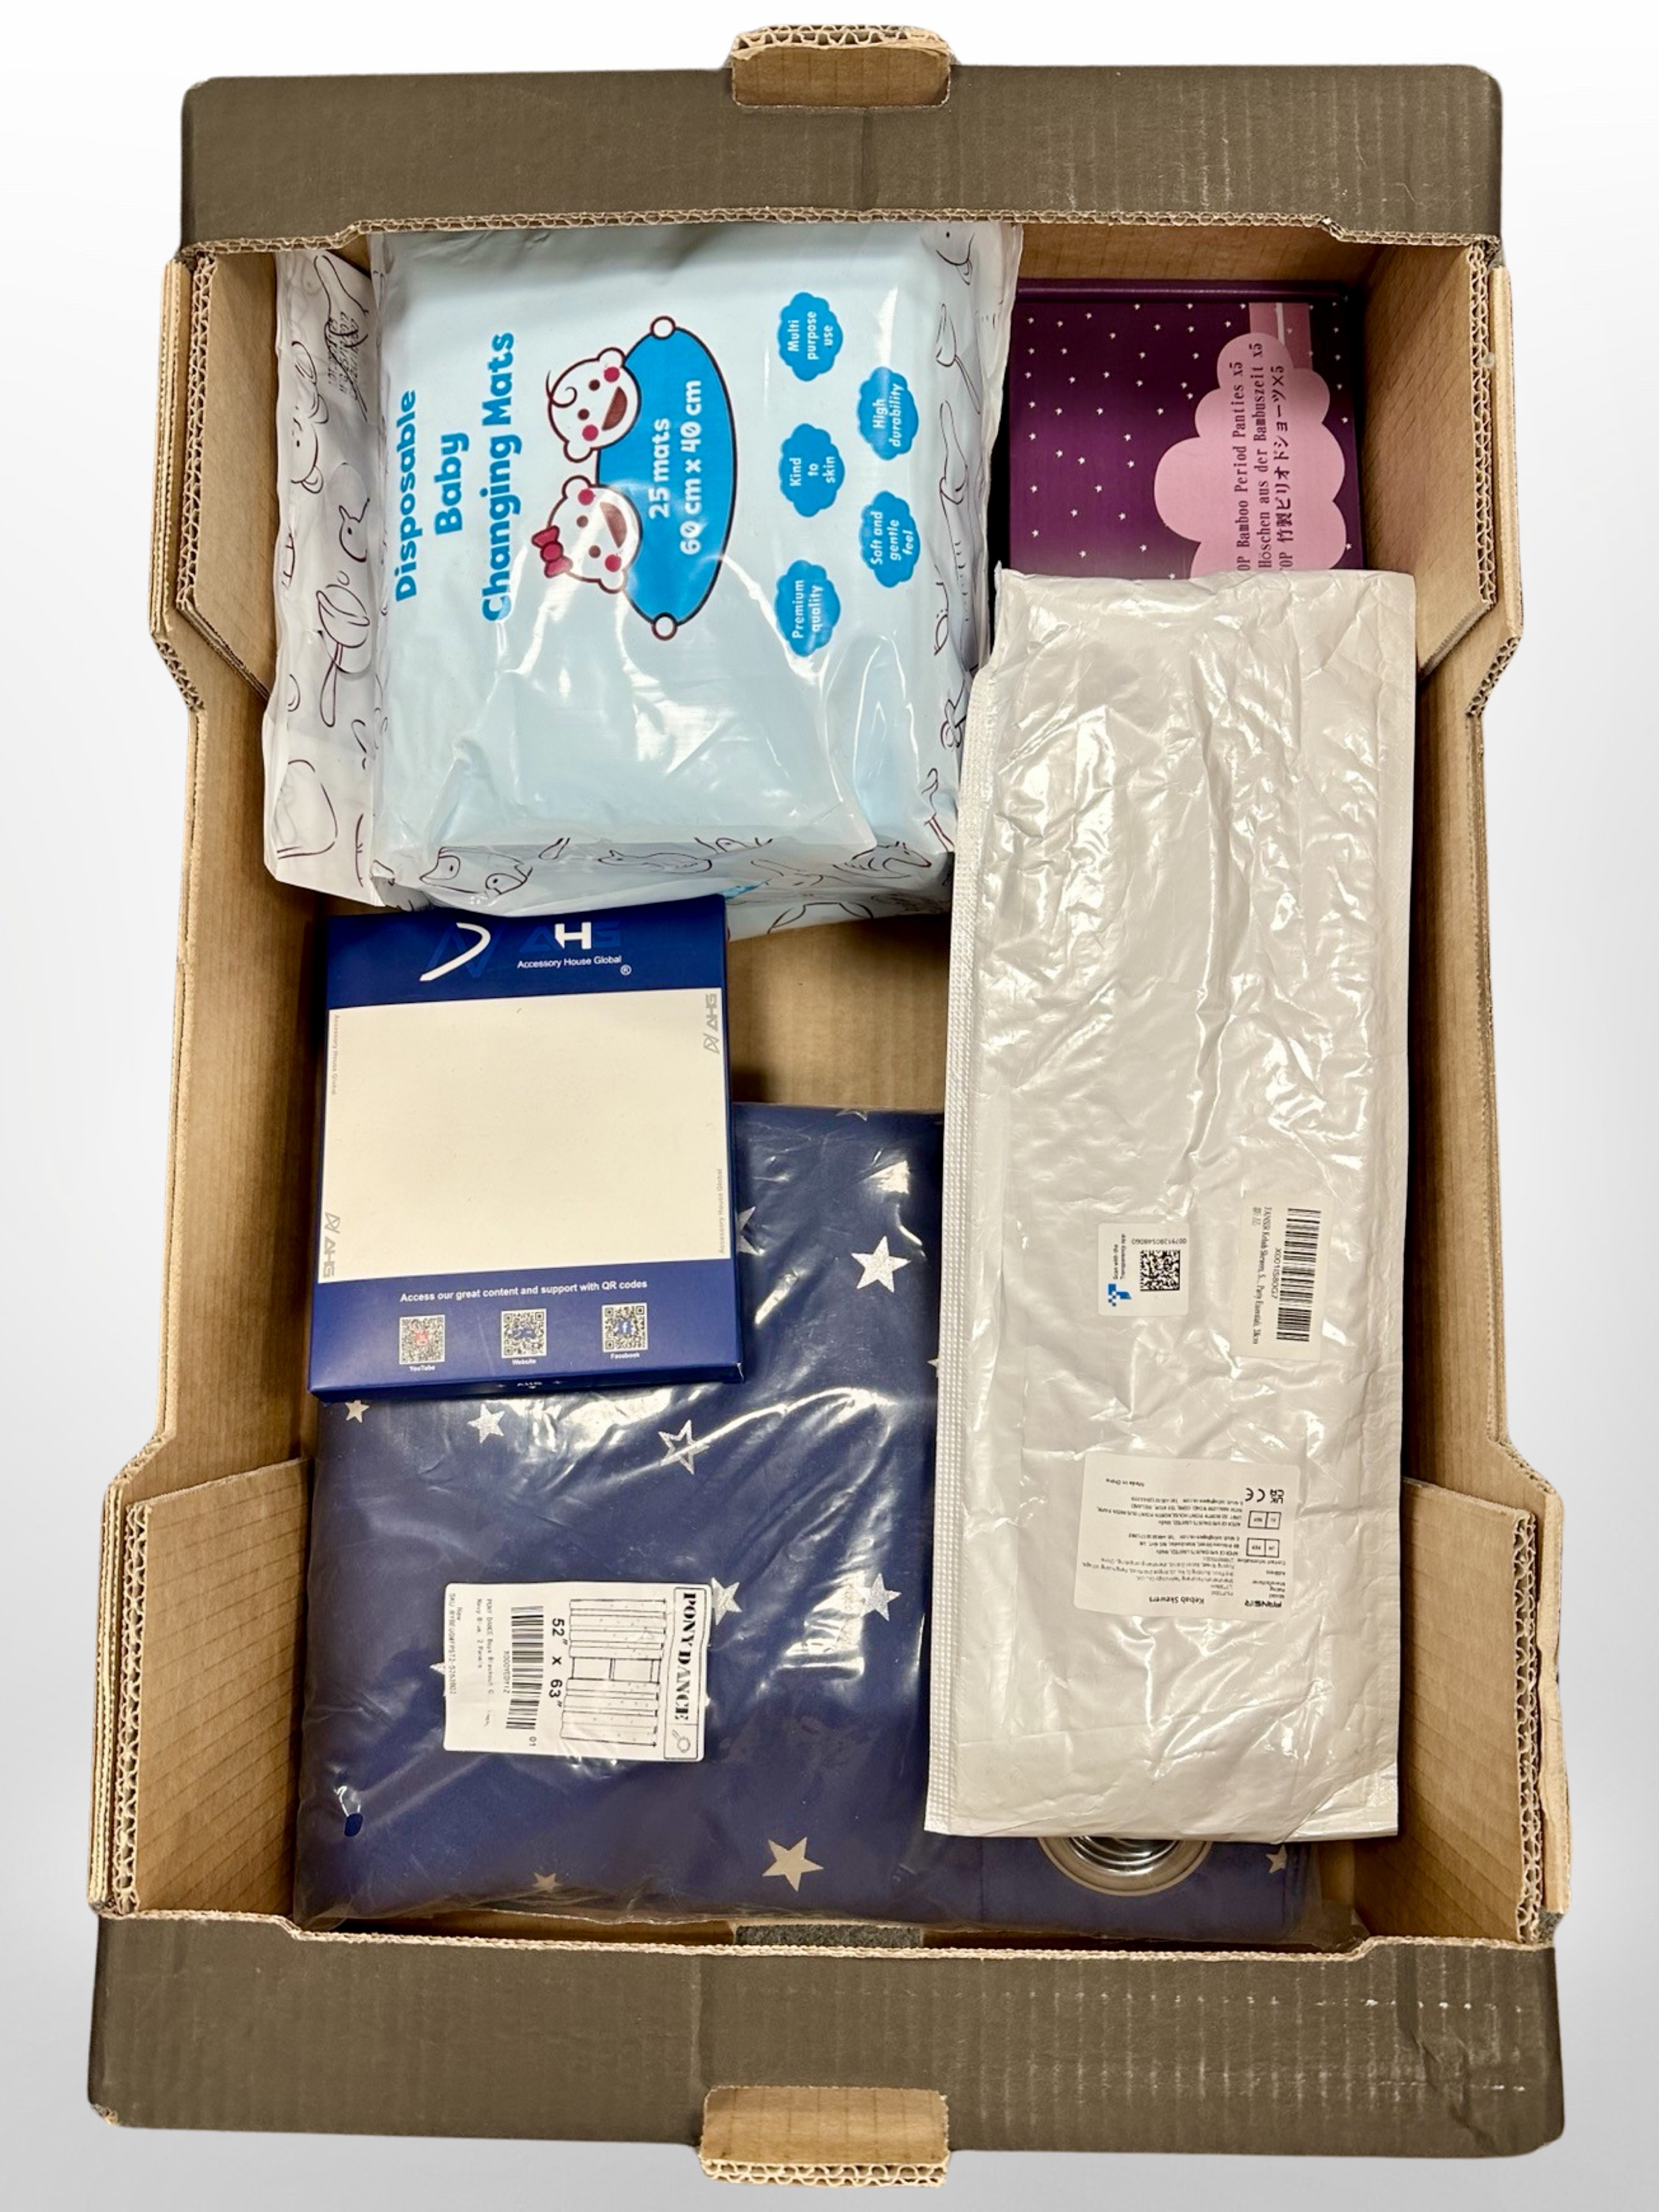 A box of new retail stock items - Keebab skewers, baby changing mats,